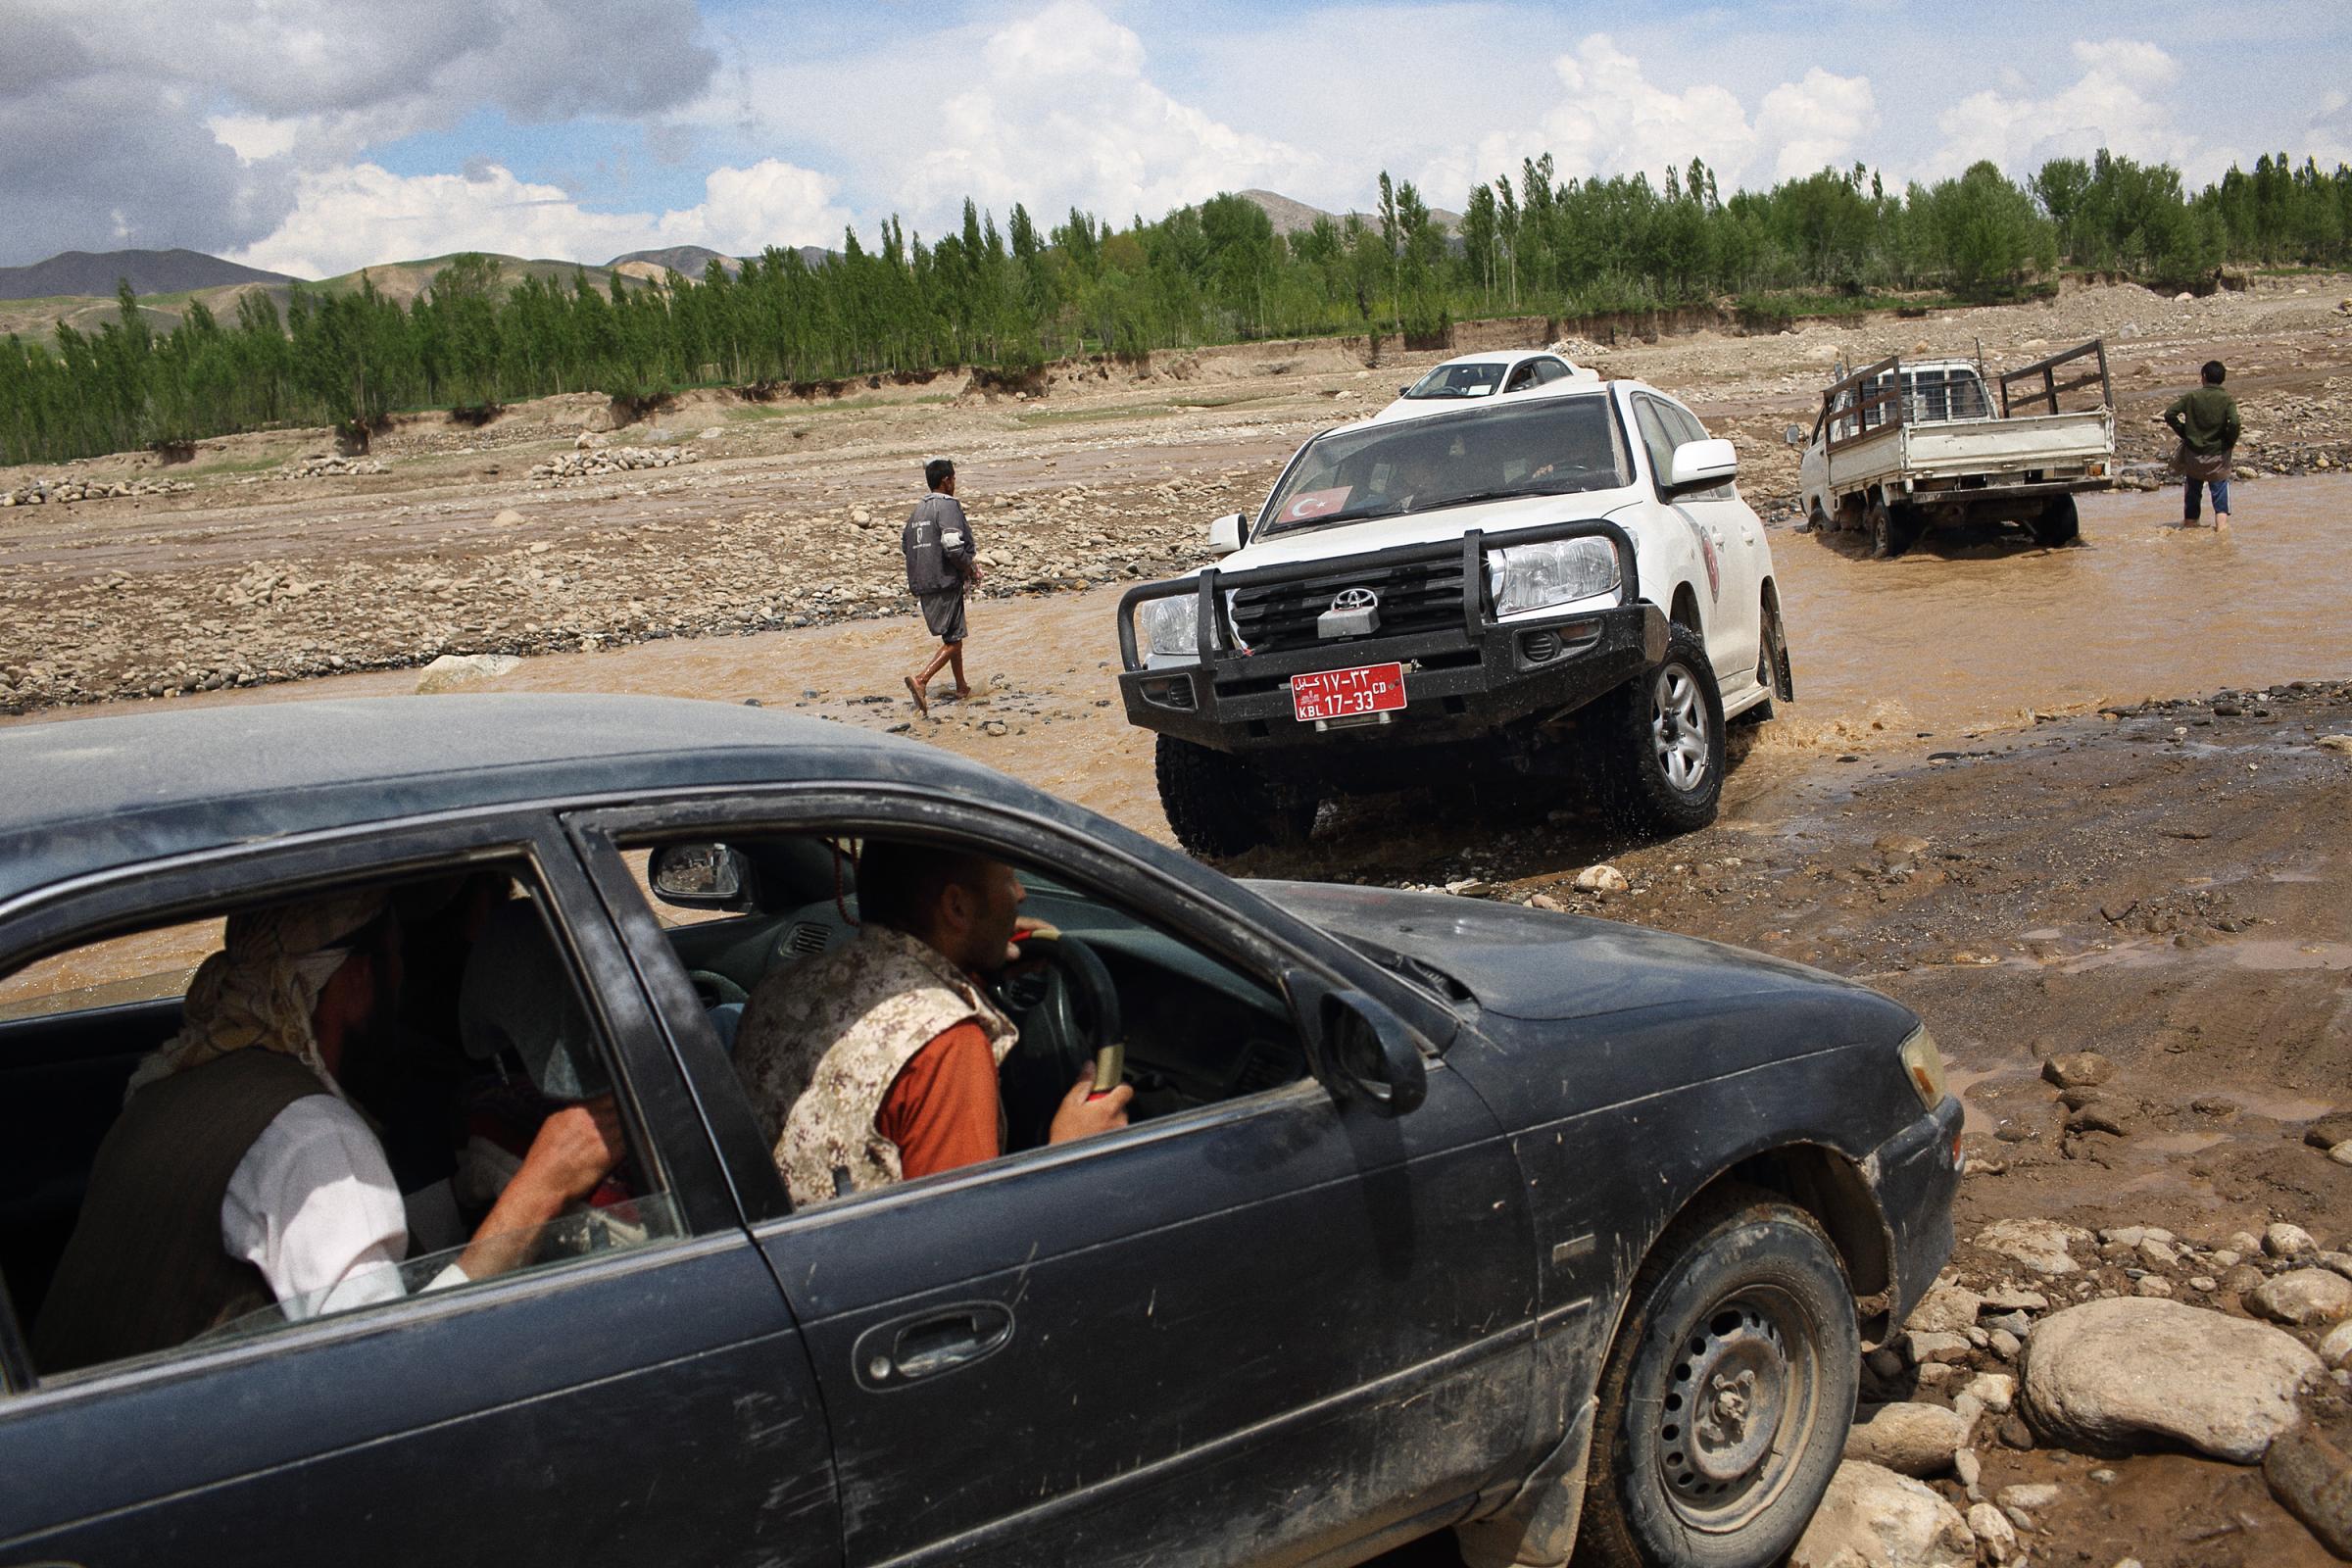 The road from the capital of Badakhshan, Faizabad to Abi Barik, is becoming increasingly hard to pass as trucks filled with aid dig deep ruts in river crossings, further hampering already compromised aid efforts, May 6, 2014.